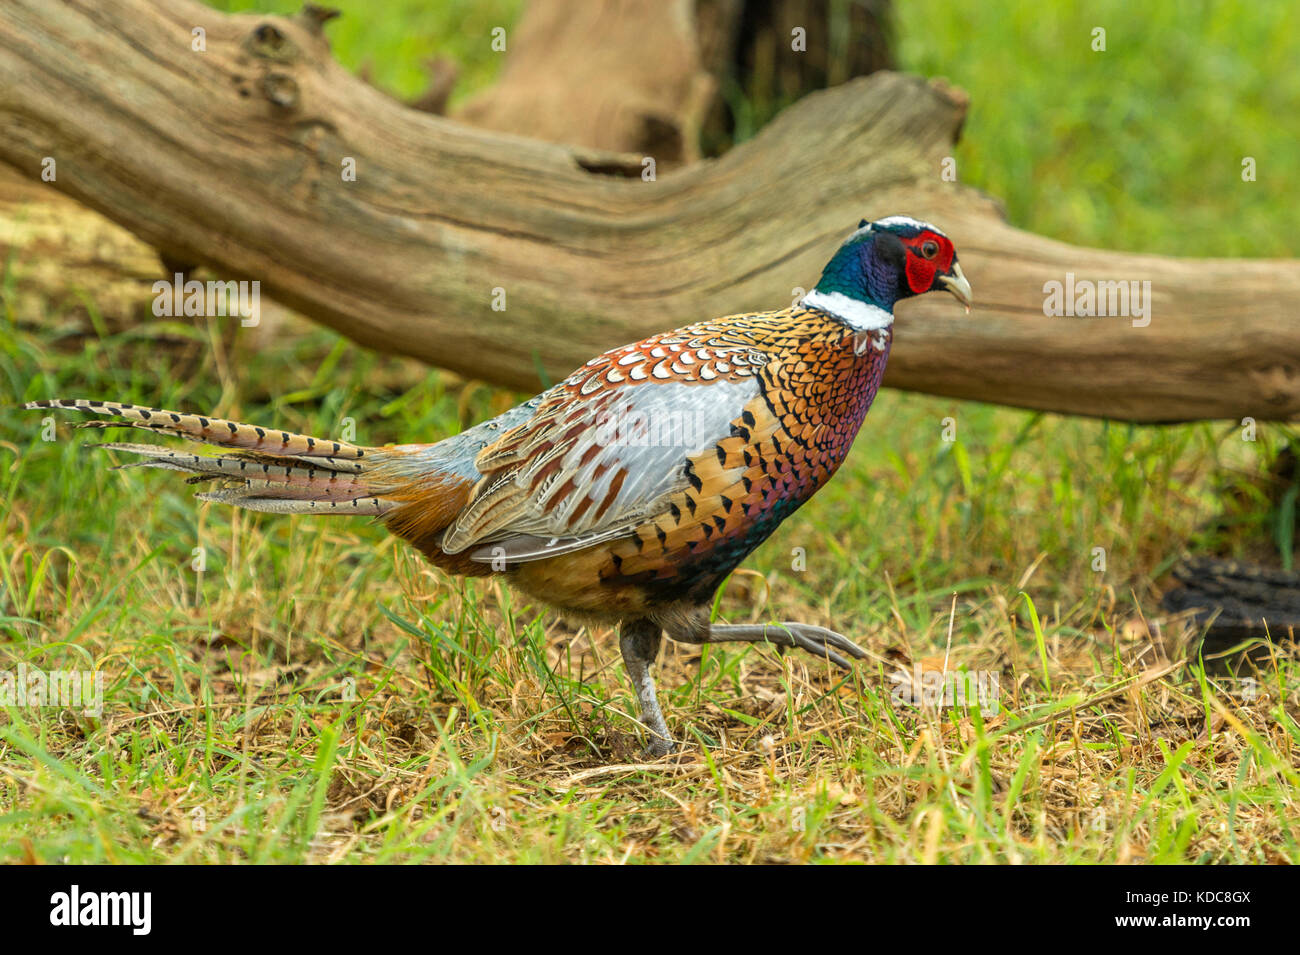 British Wildlife in Natural Habitat. Single Ring-necked Pheasant foraging in ancient woodlands on bright autumn day. Stock Photo